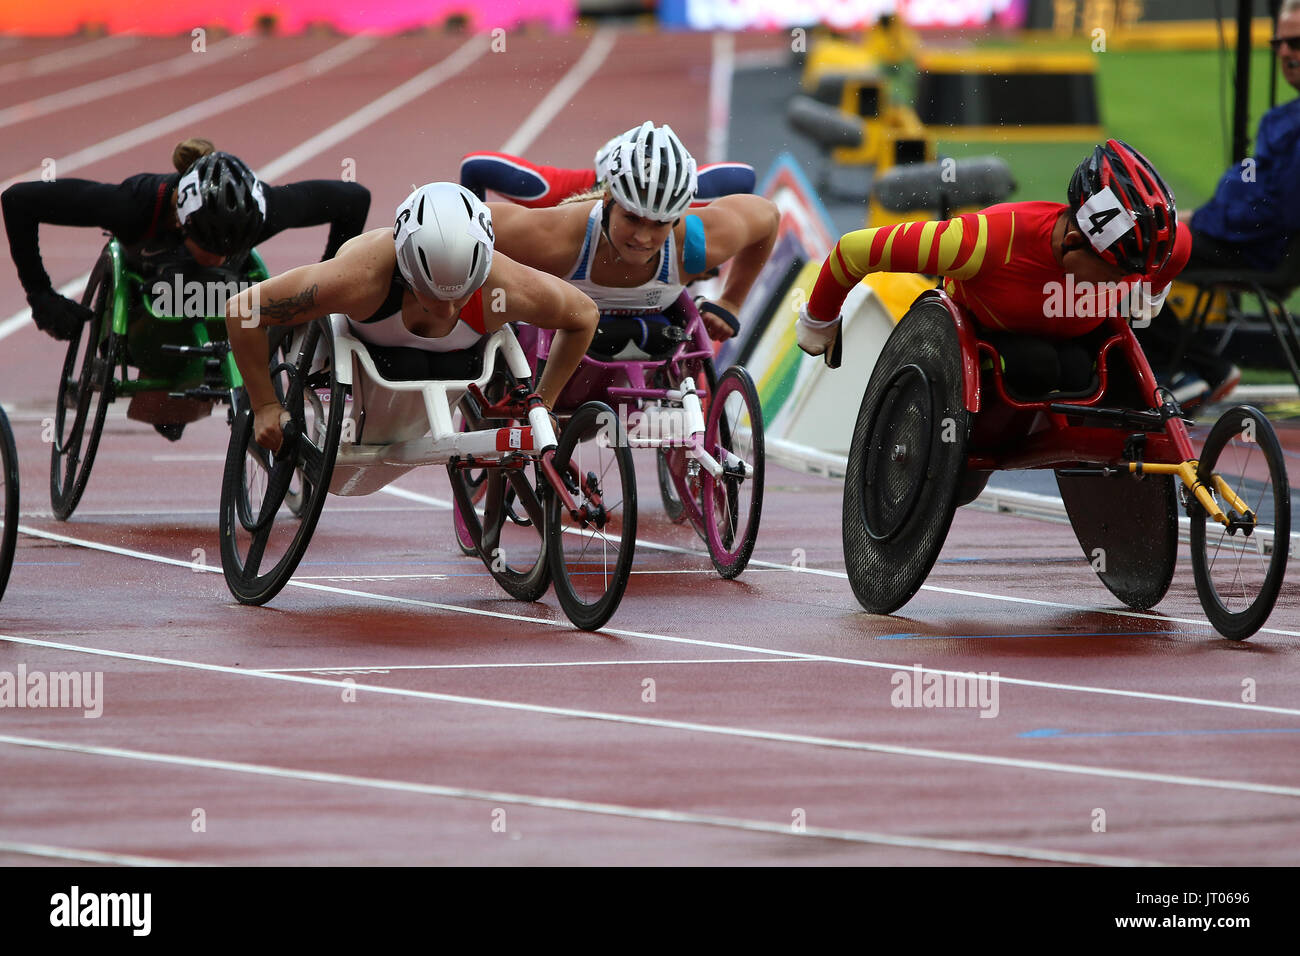 Samantha KINGHORN of Great Britain in the Women's 800m T53 Final at the World Para Championships in London 2017 Stock Photo